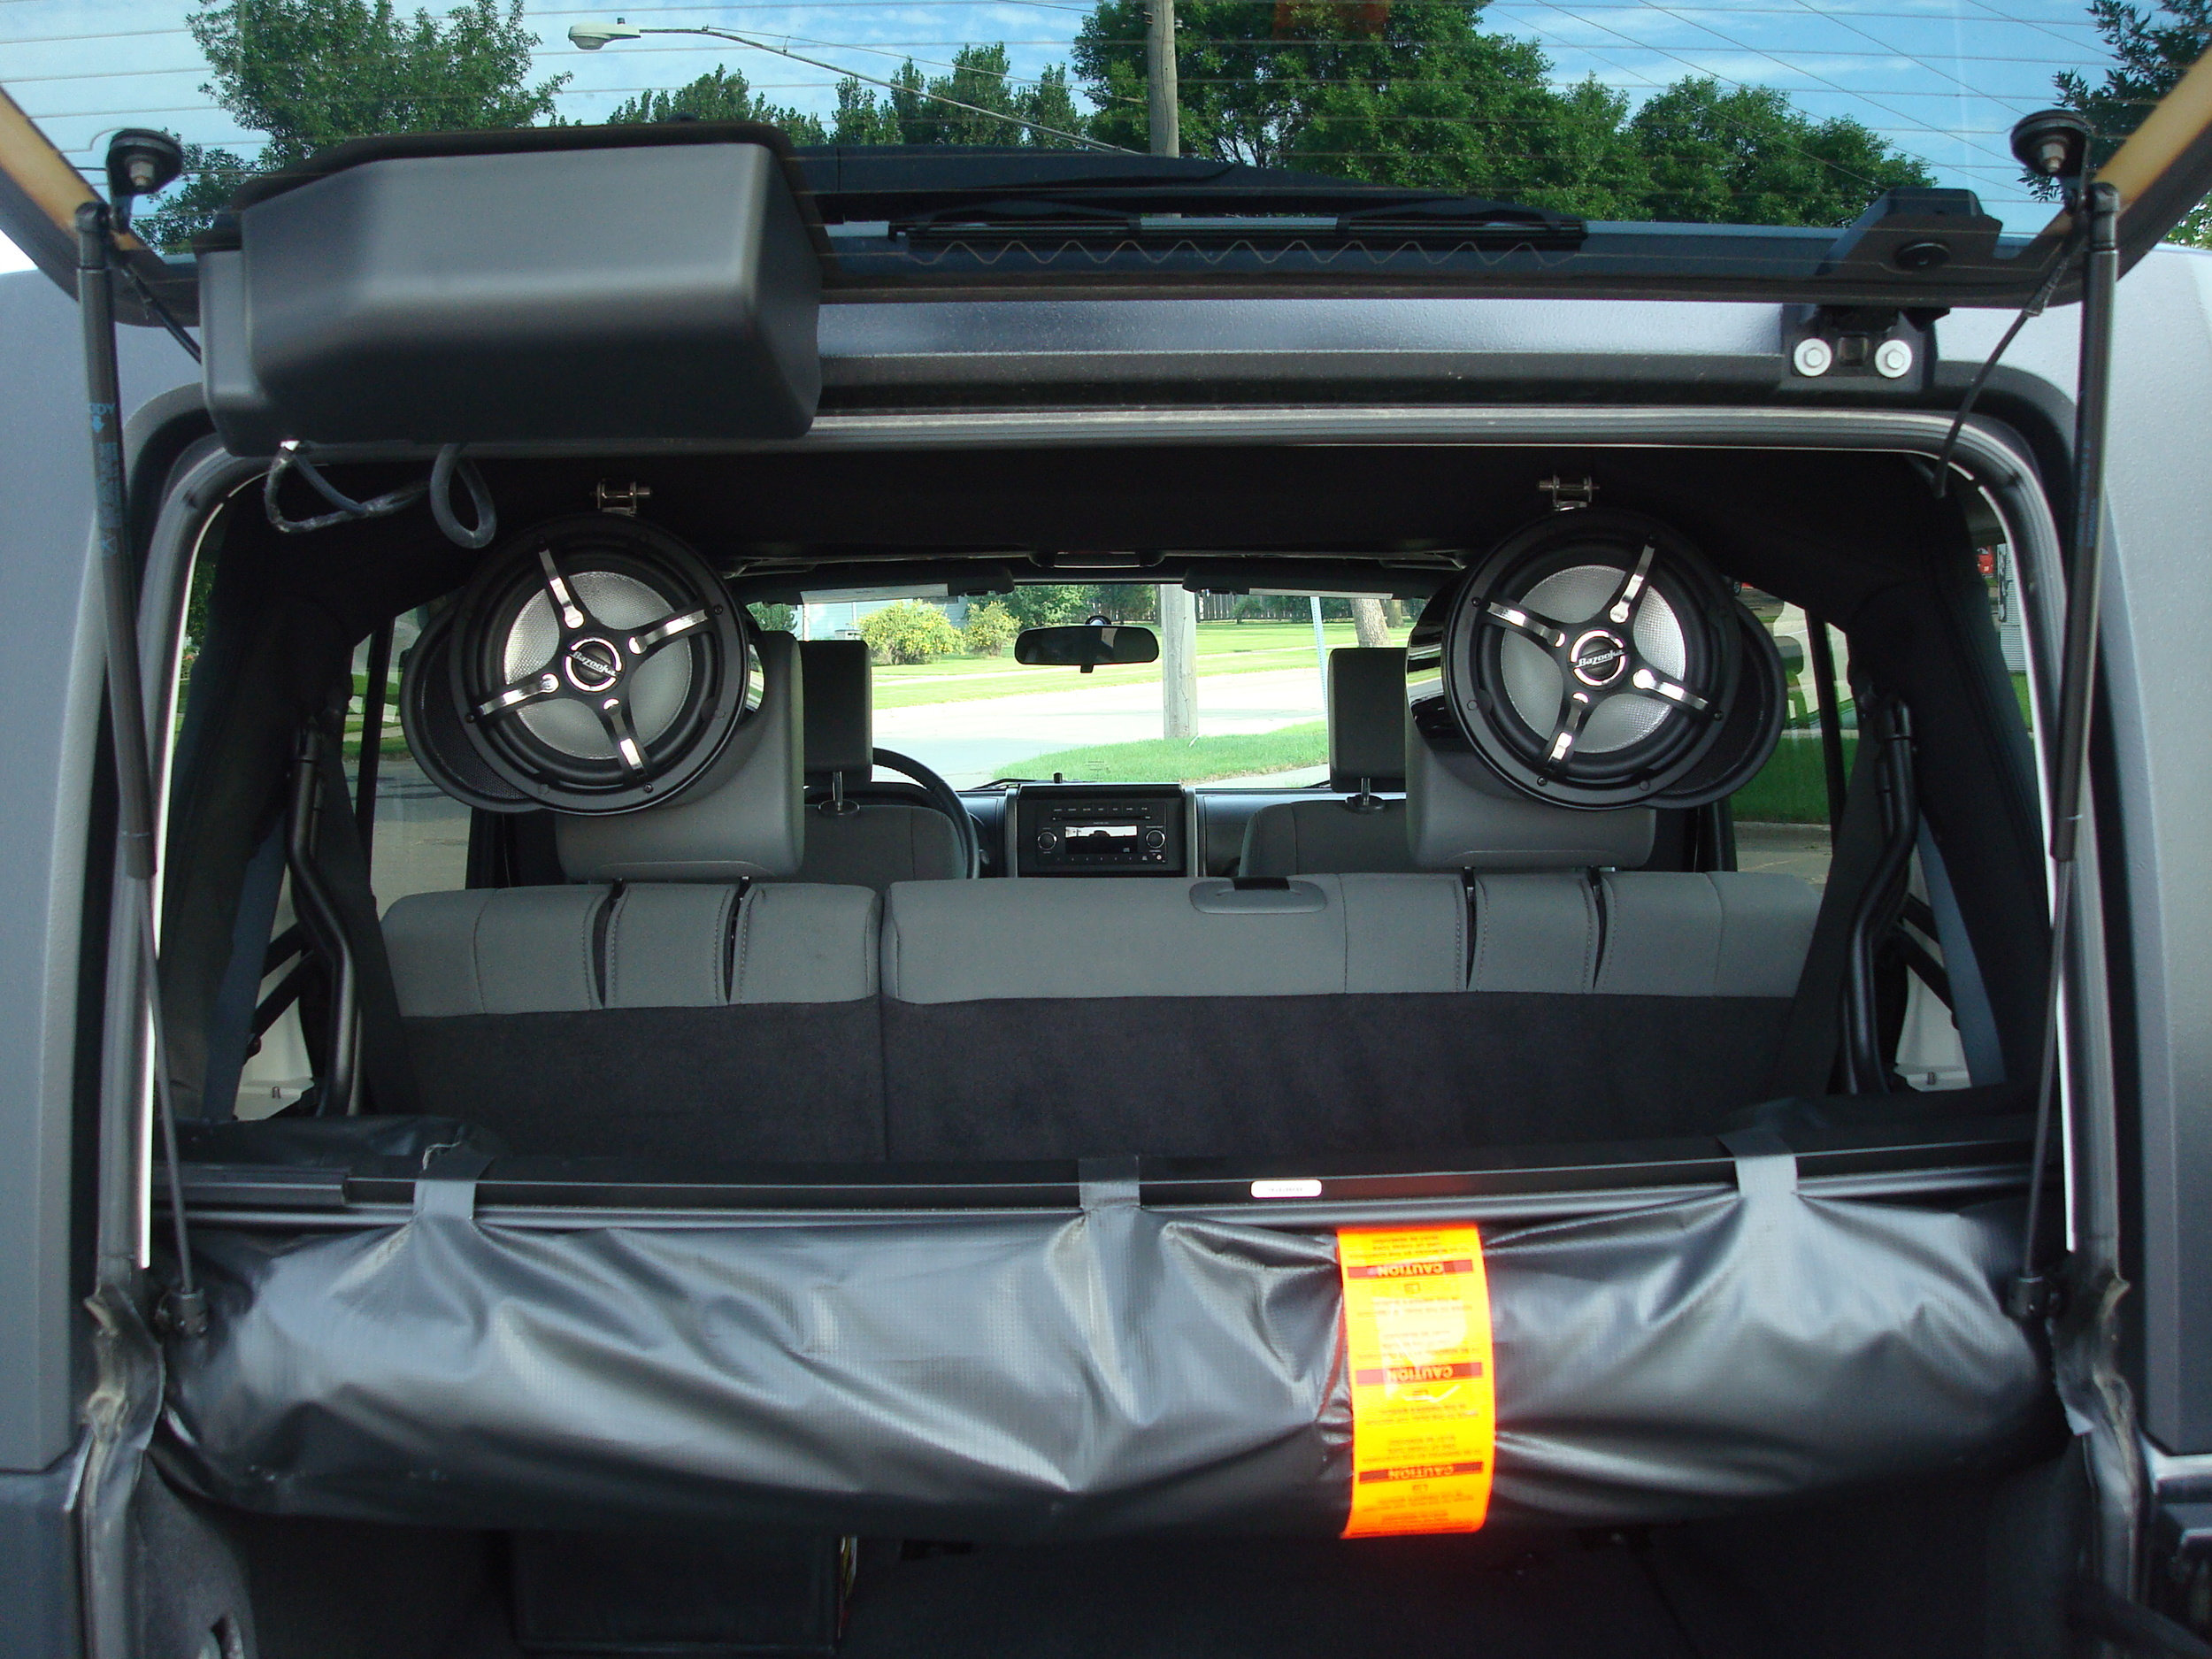 2010 Jeep Wrangler - Tower speakers added for radio station location broadcasts